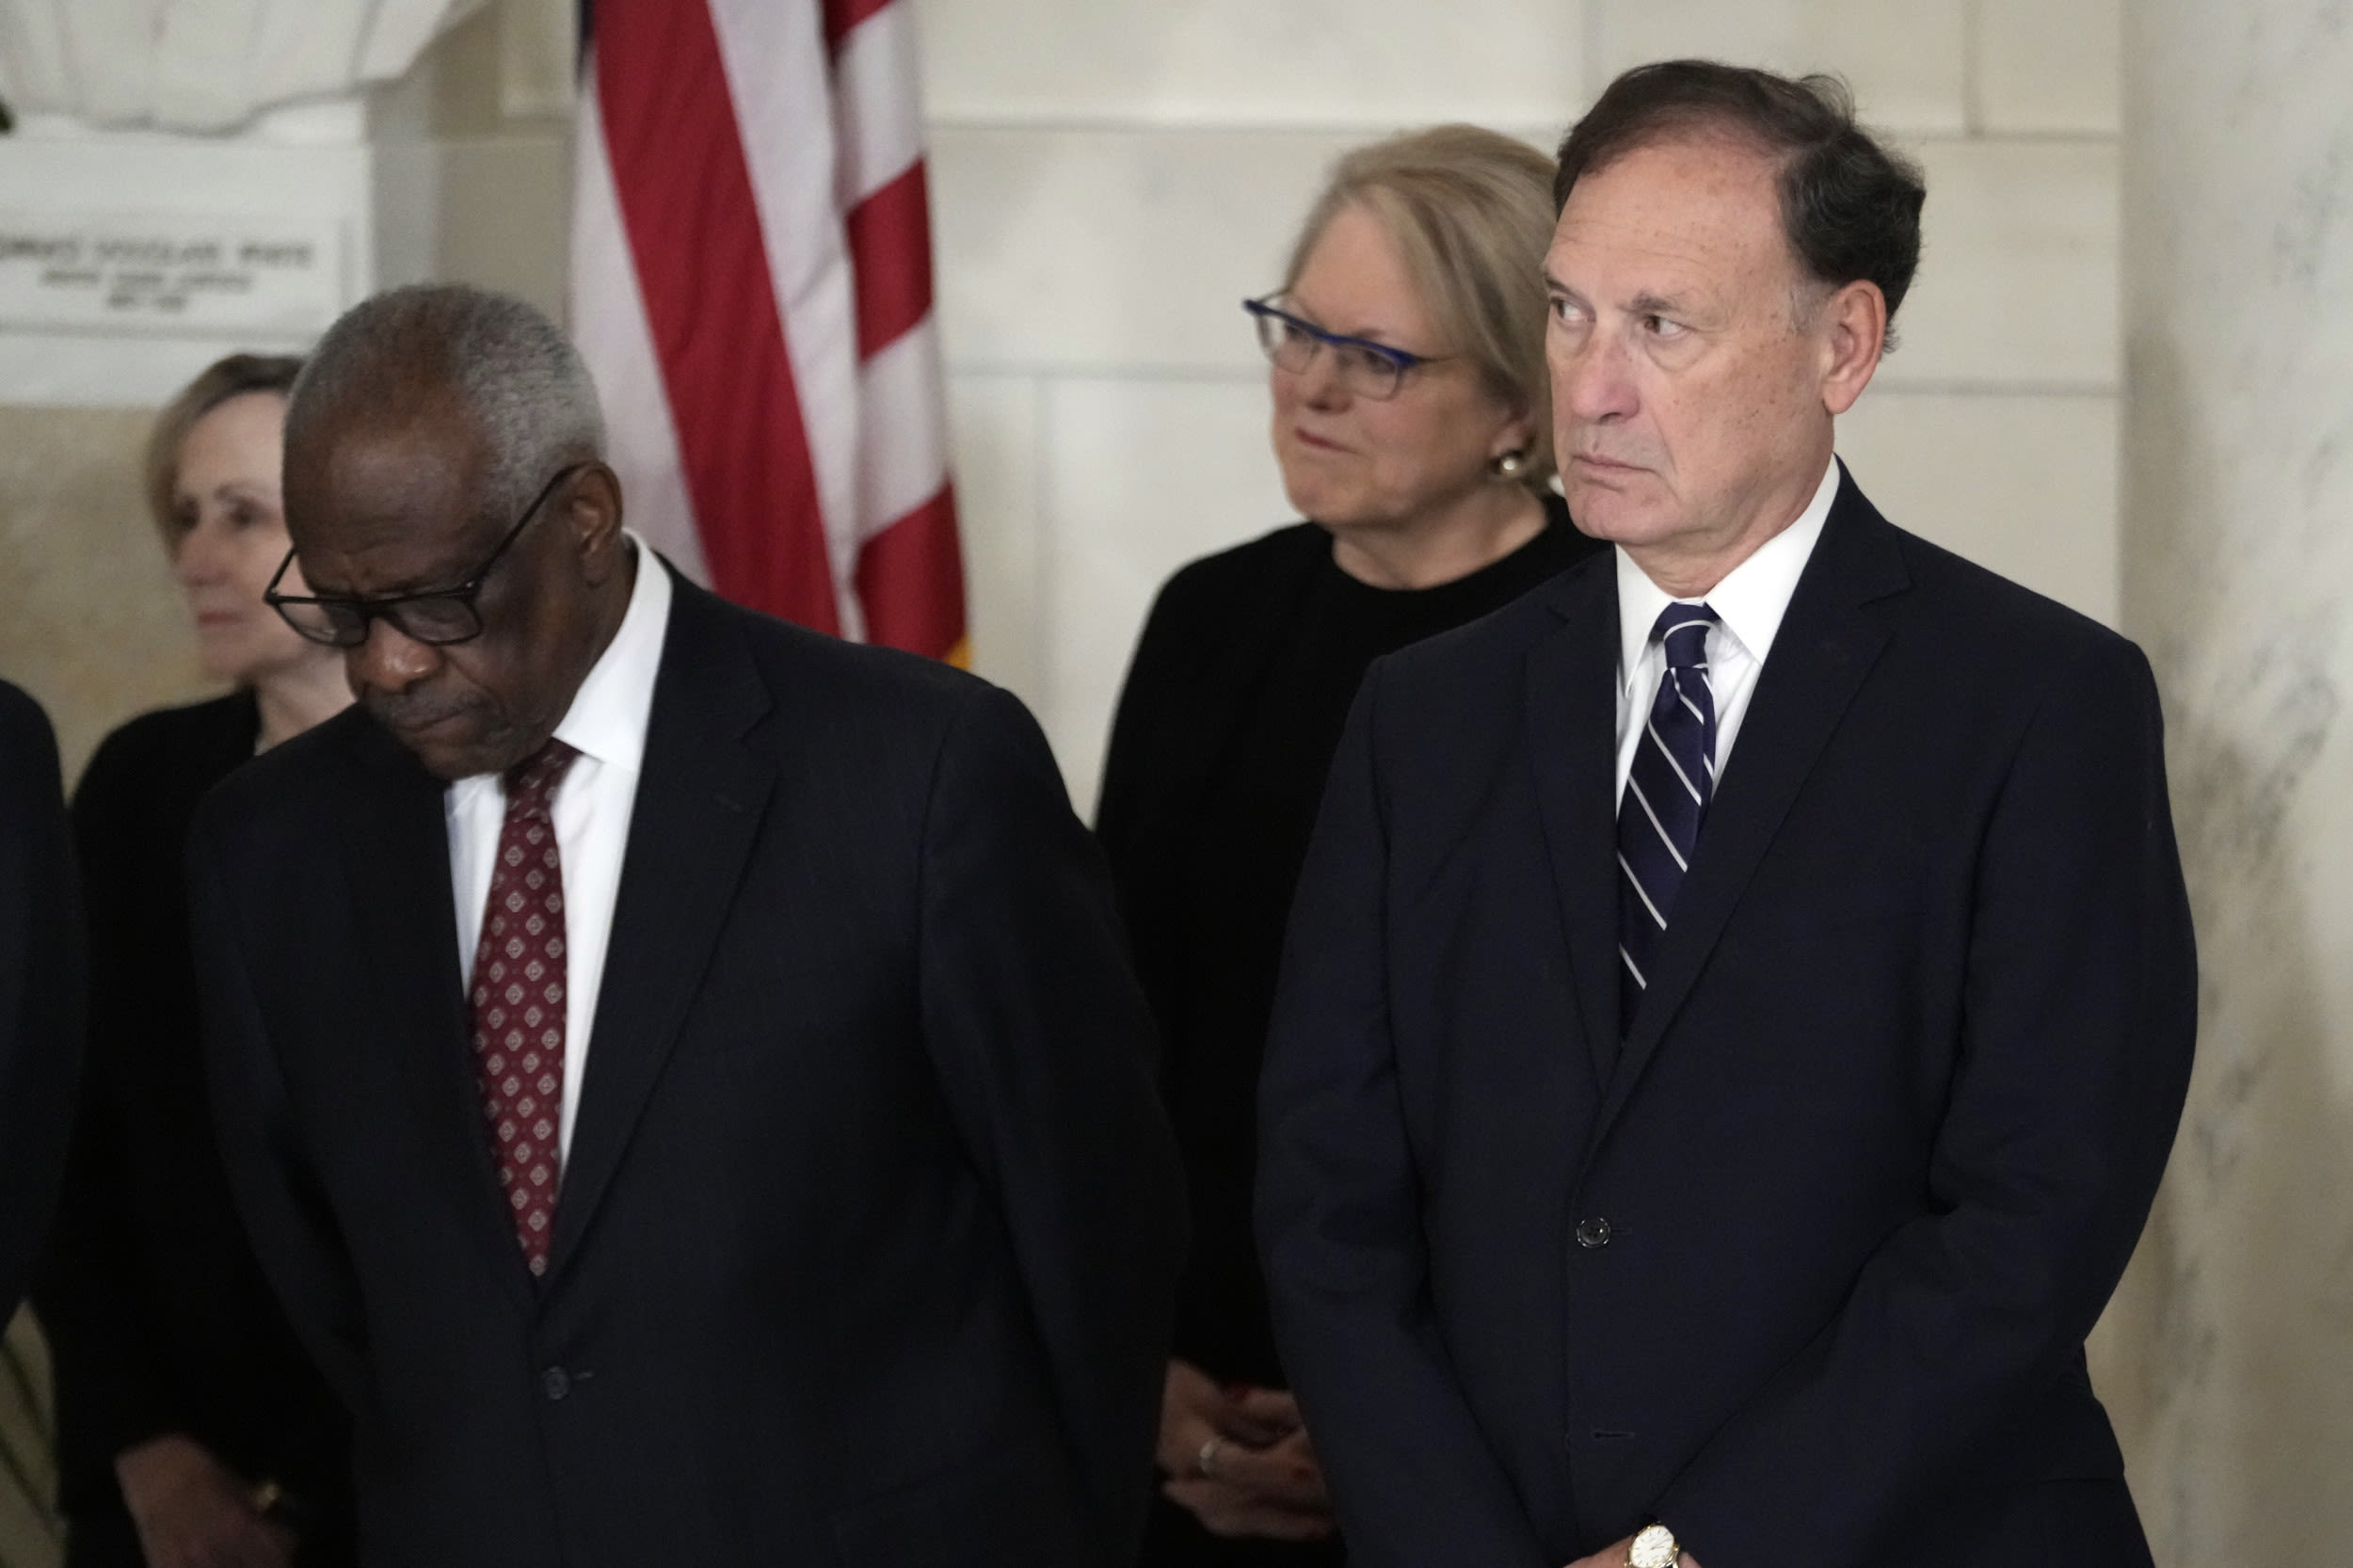 False Flag: Alito Incident Shows Need for Enforceable Court Ethics Code